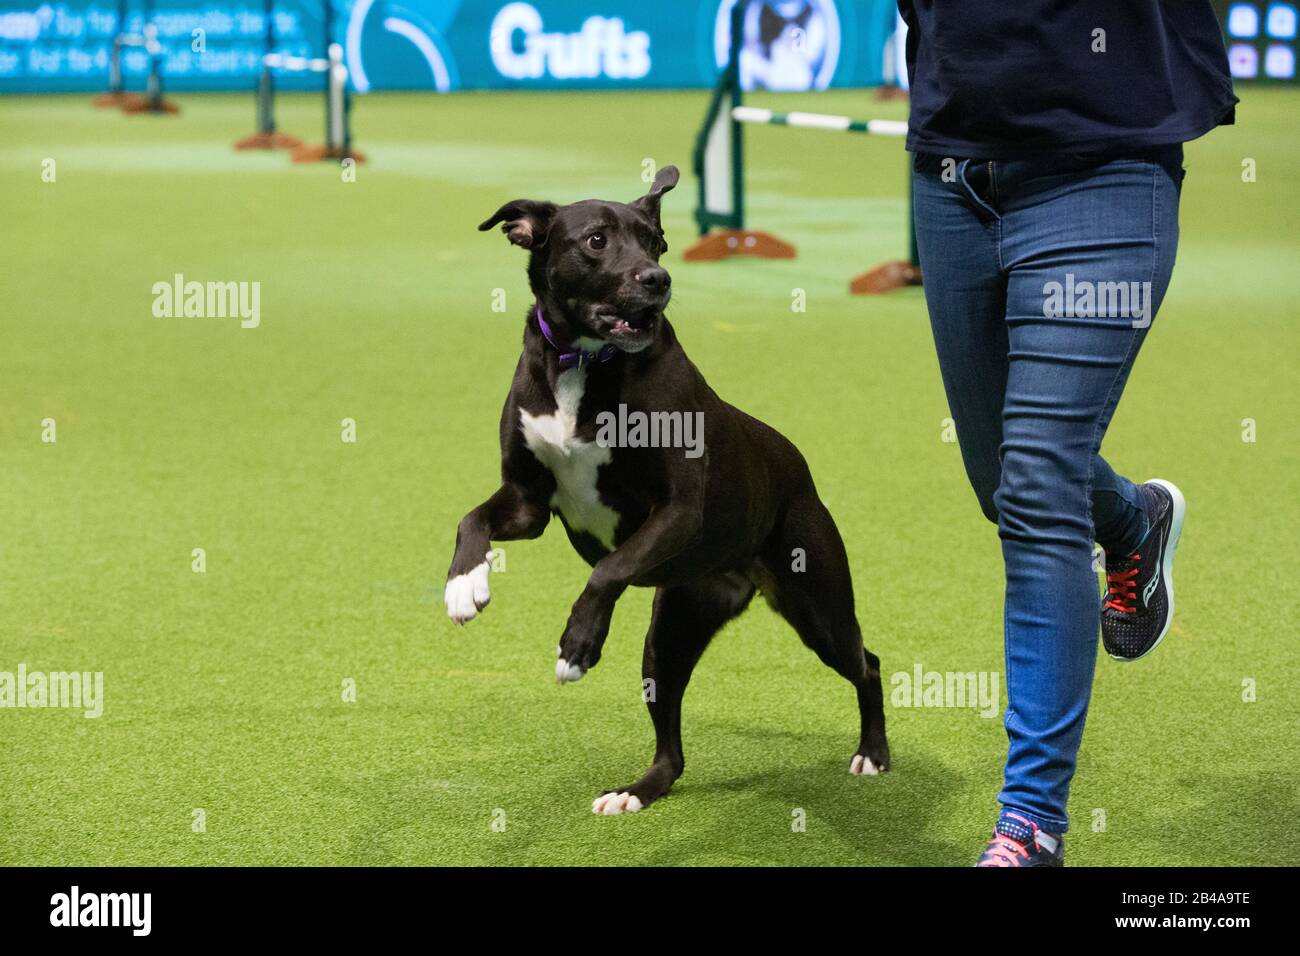 Birmingham, UK. 6th Mar, 2020. Rescue dogs take part in an agility display on the second day of Crufts. Credit: Jon Freeman/Alamy Live News Credit: Jon Freeman/Alamy Live News Stock Photo